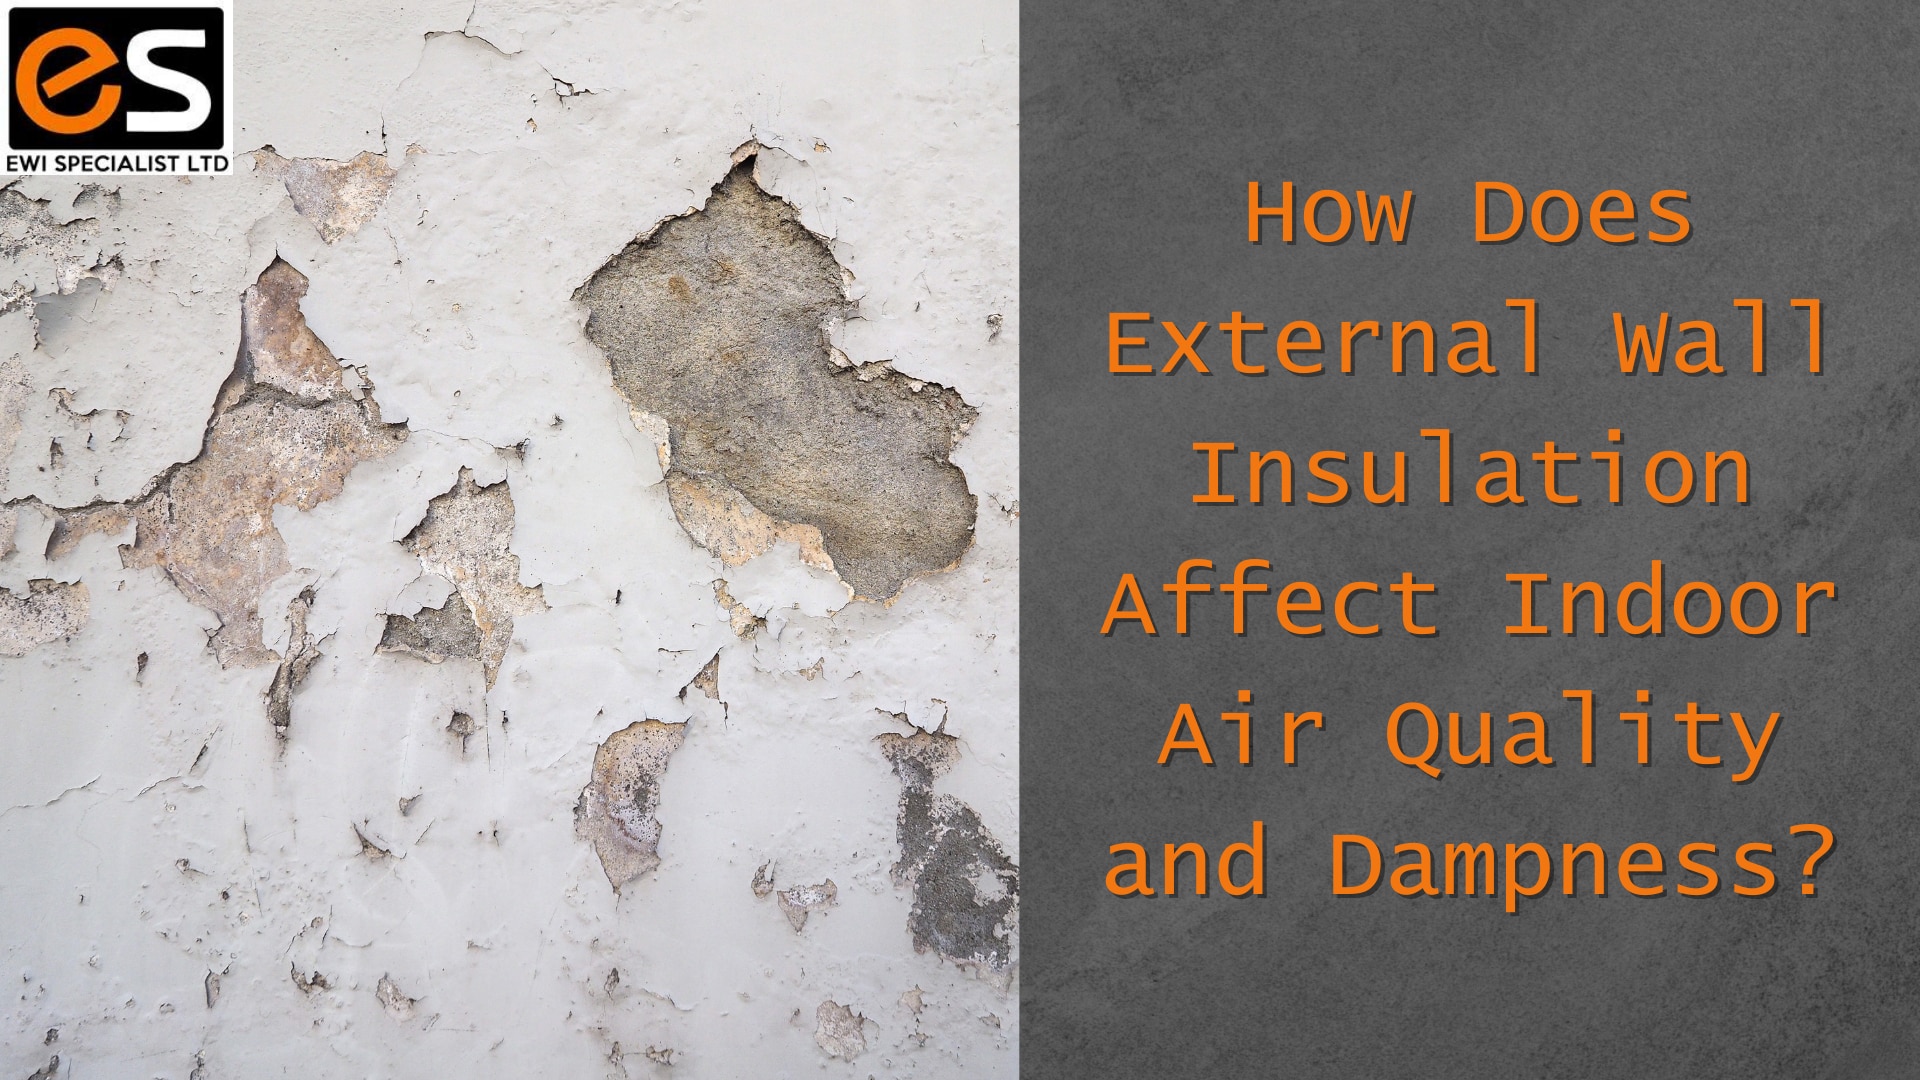 External Wall Insulation and Indoor Air Quality